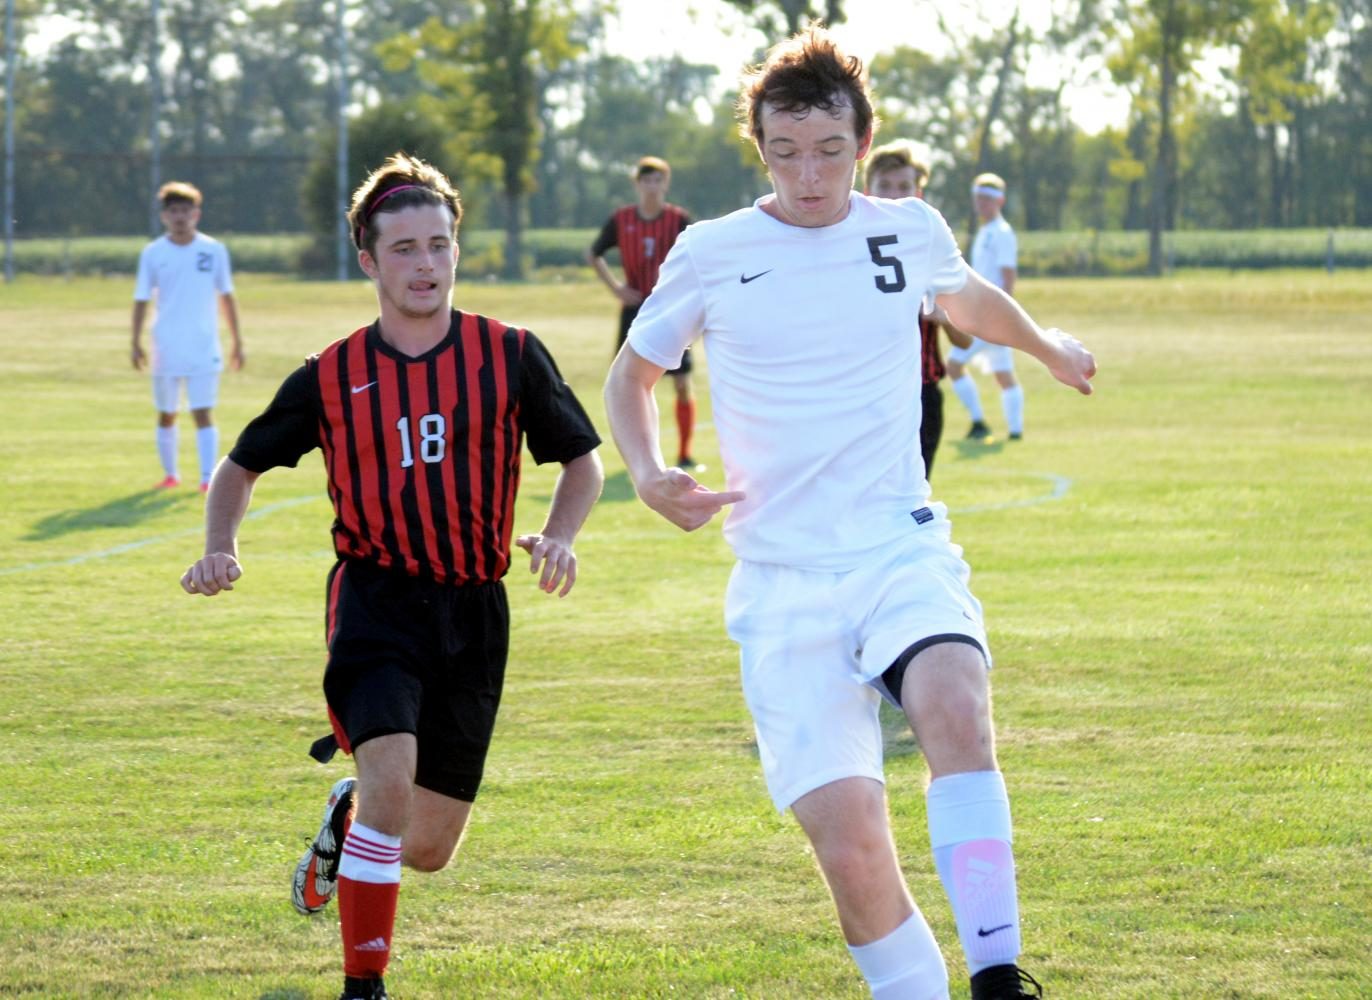 Junior Luke Pierce tackles the ball against Edgewood in a victory.